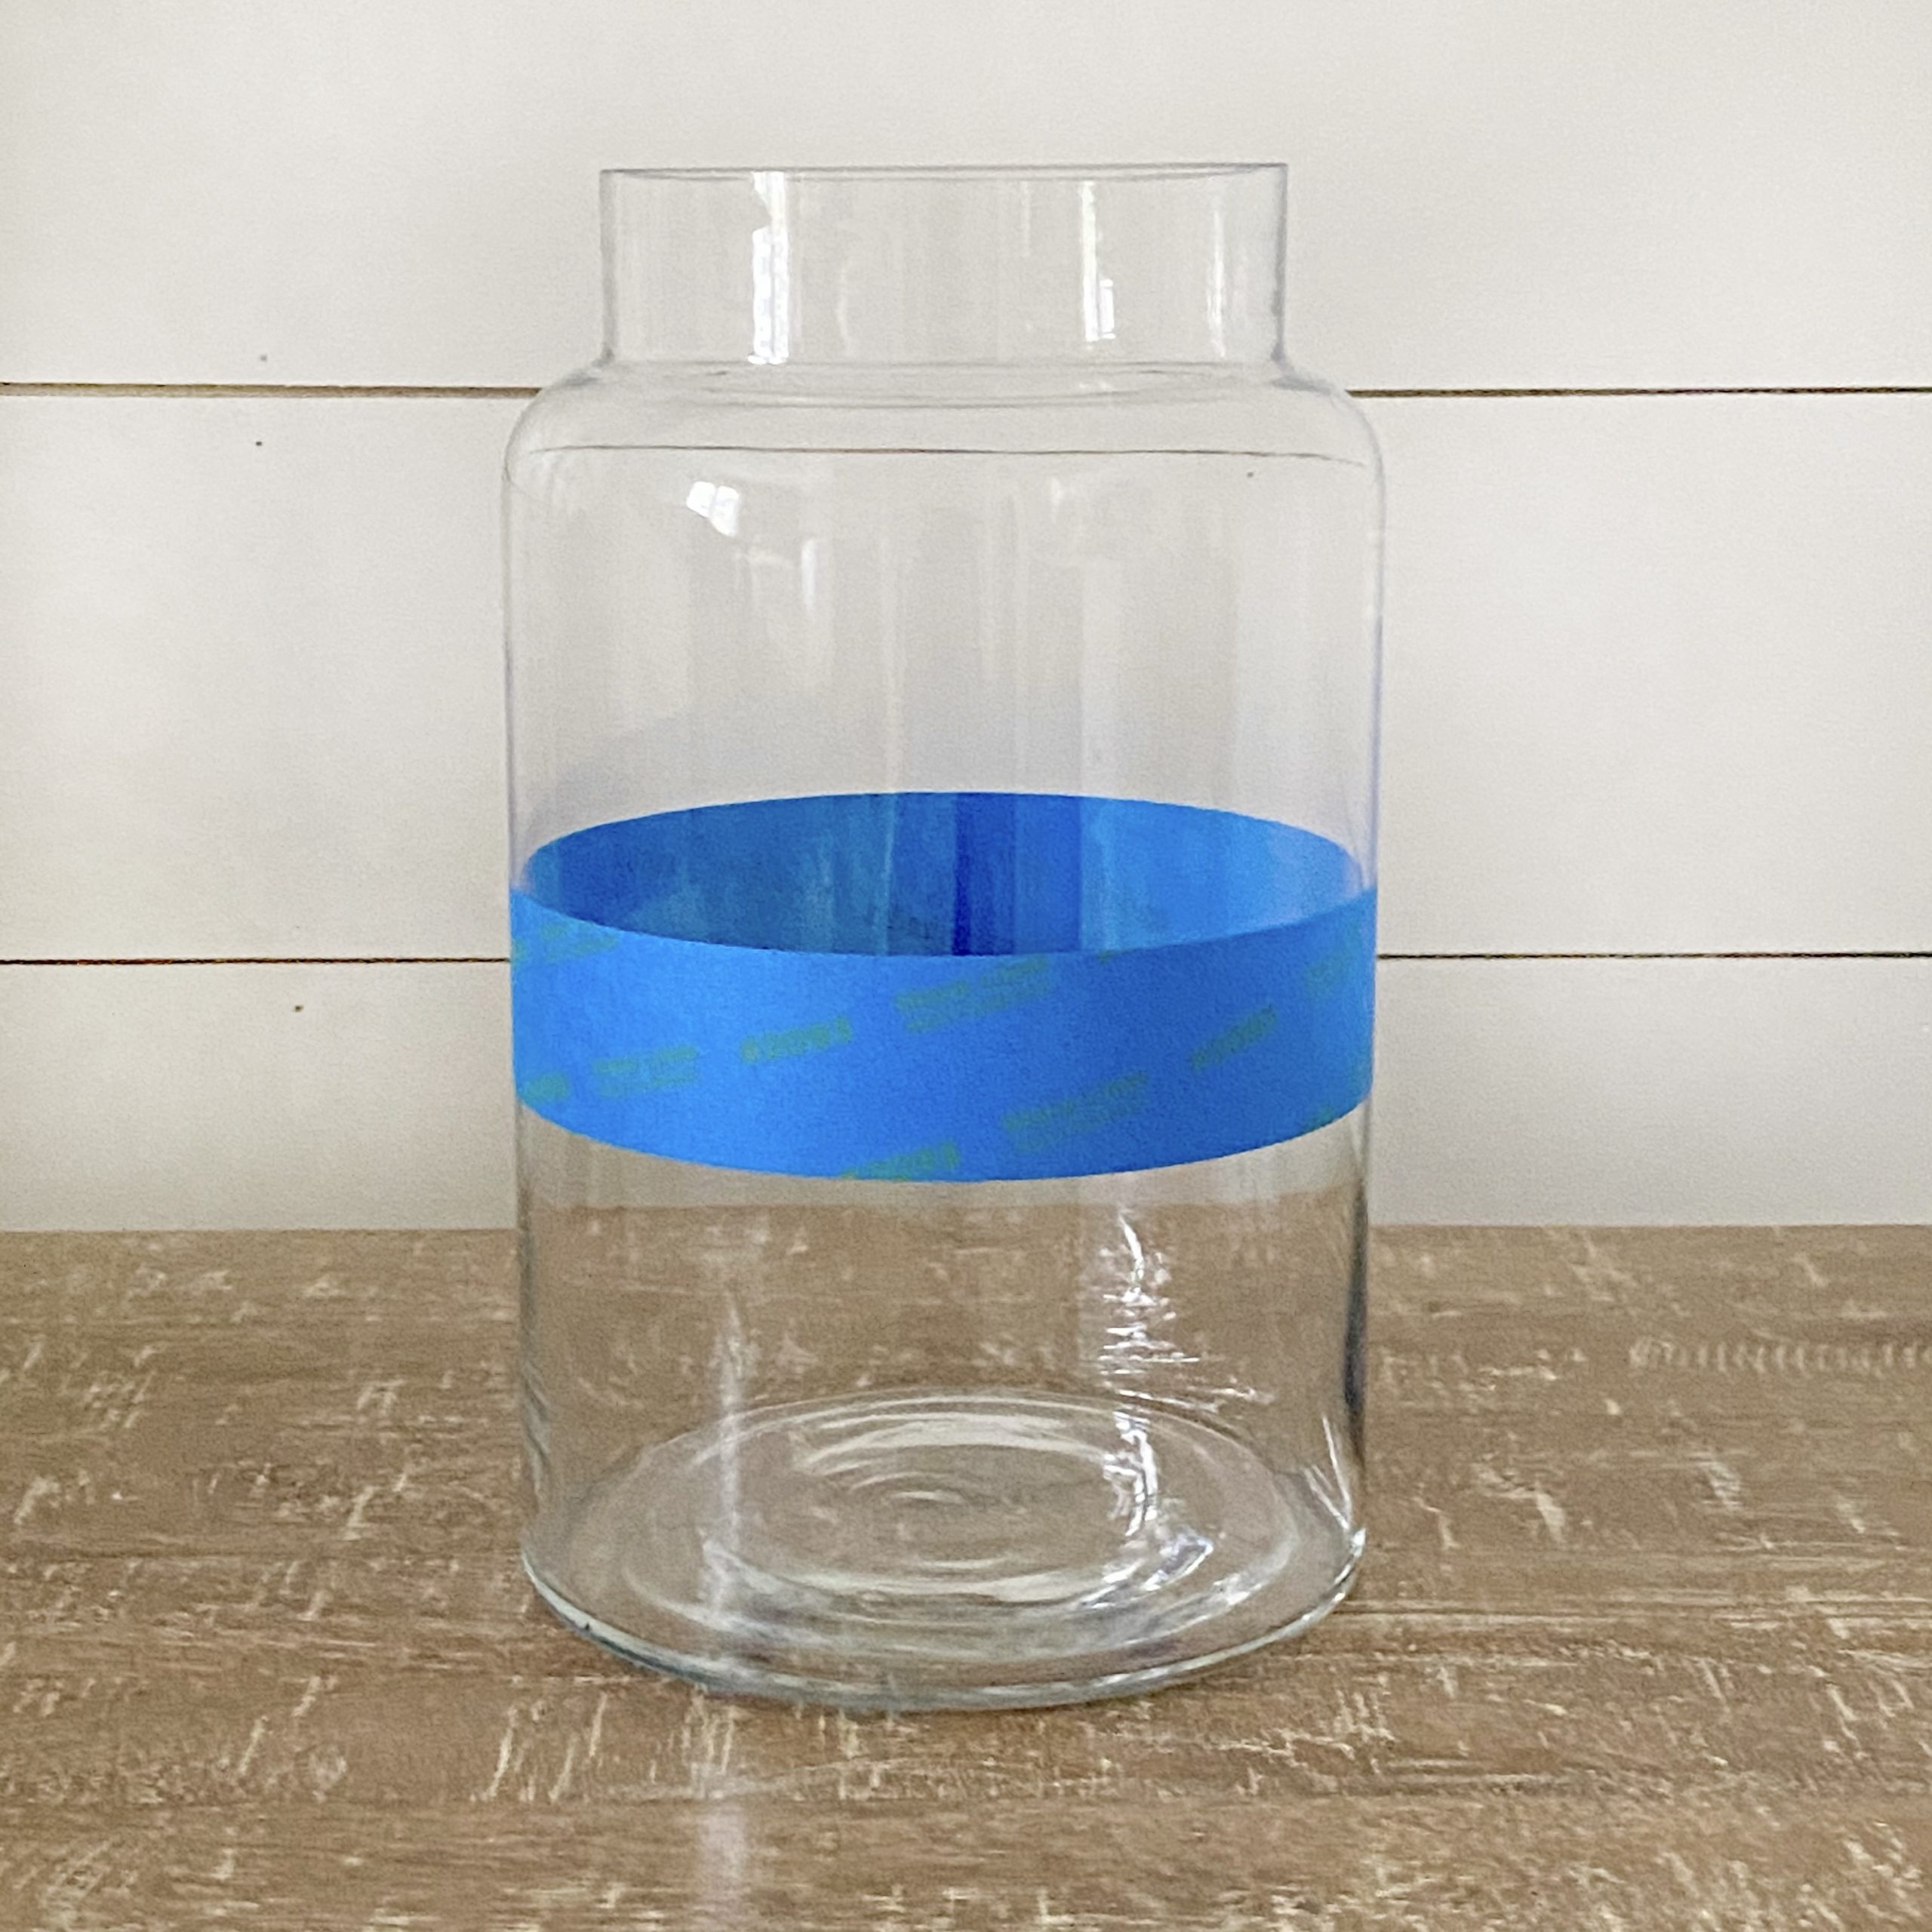 A glass vase with painters tape marking where the paint will be applied to the vase.